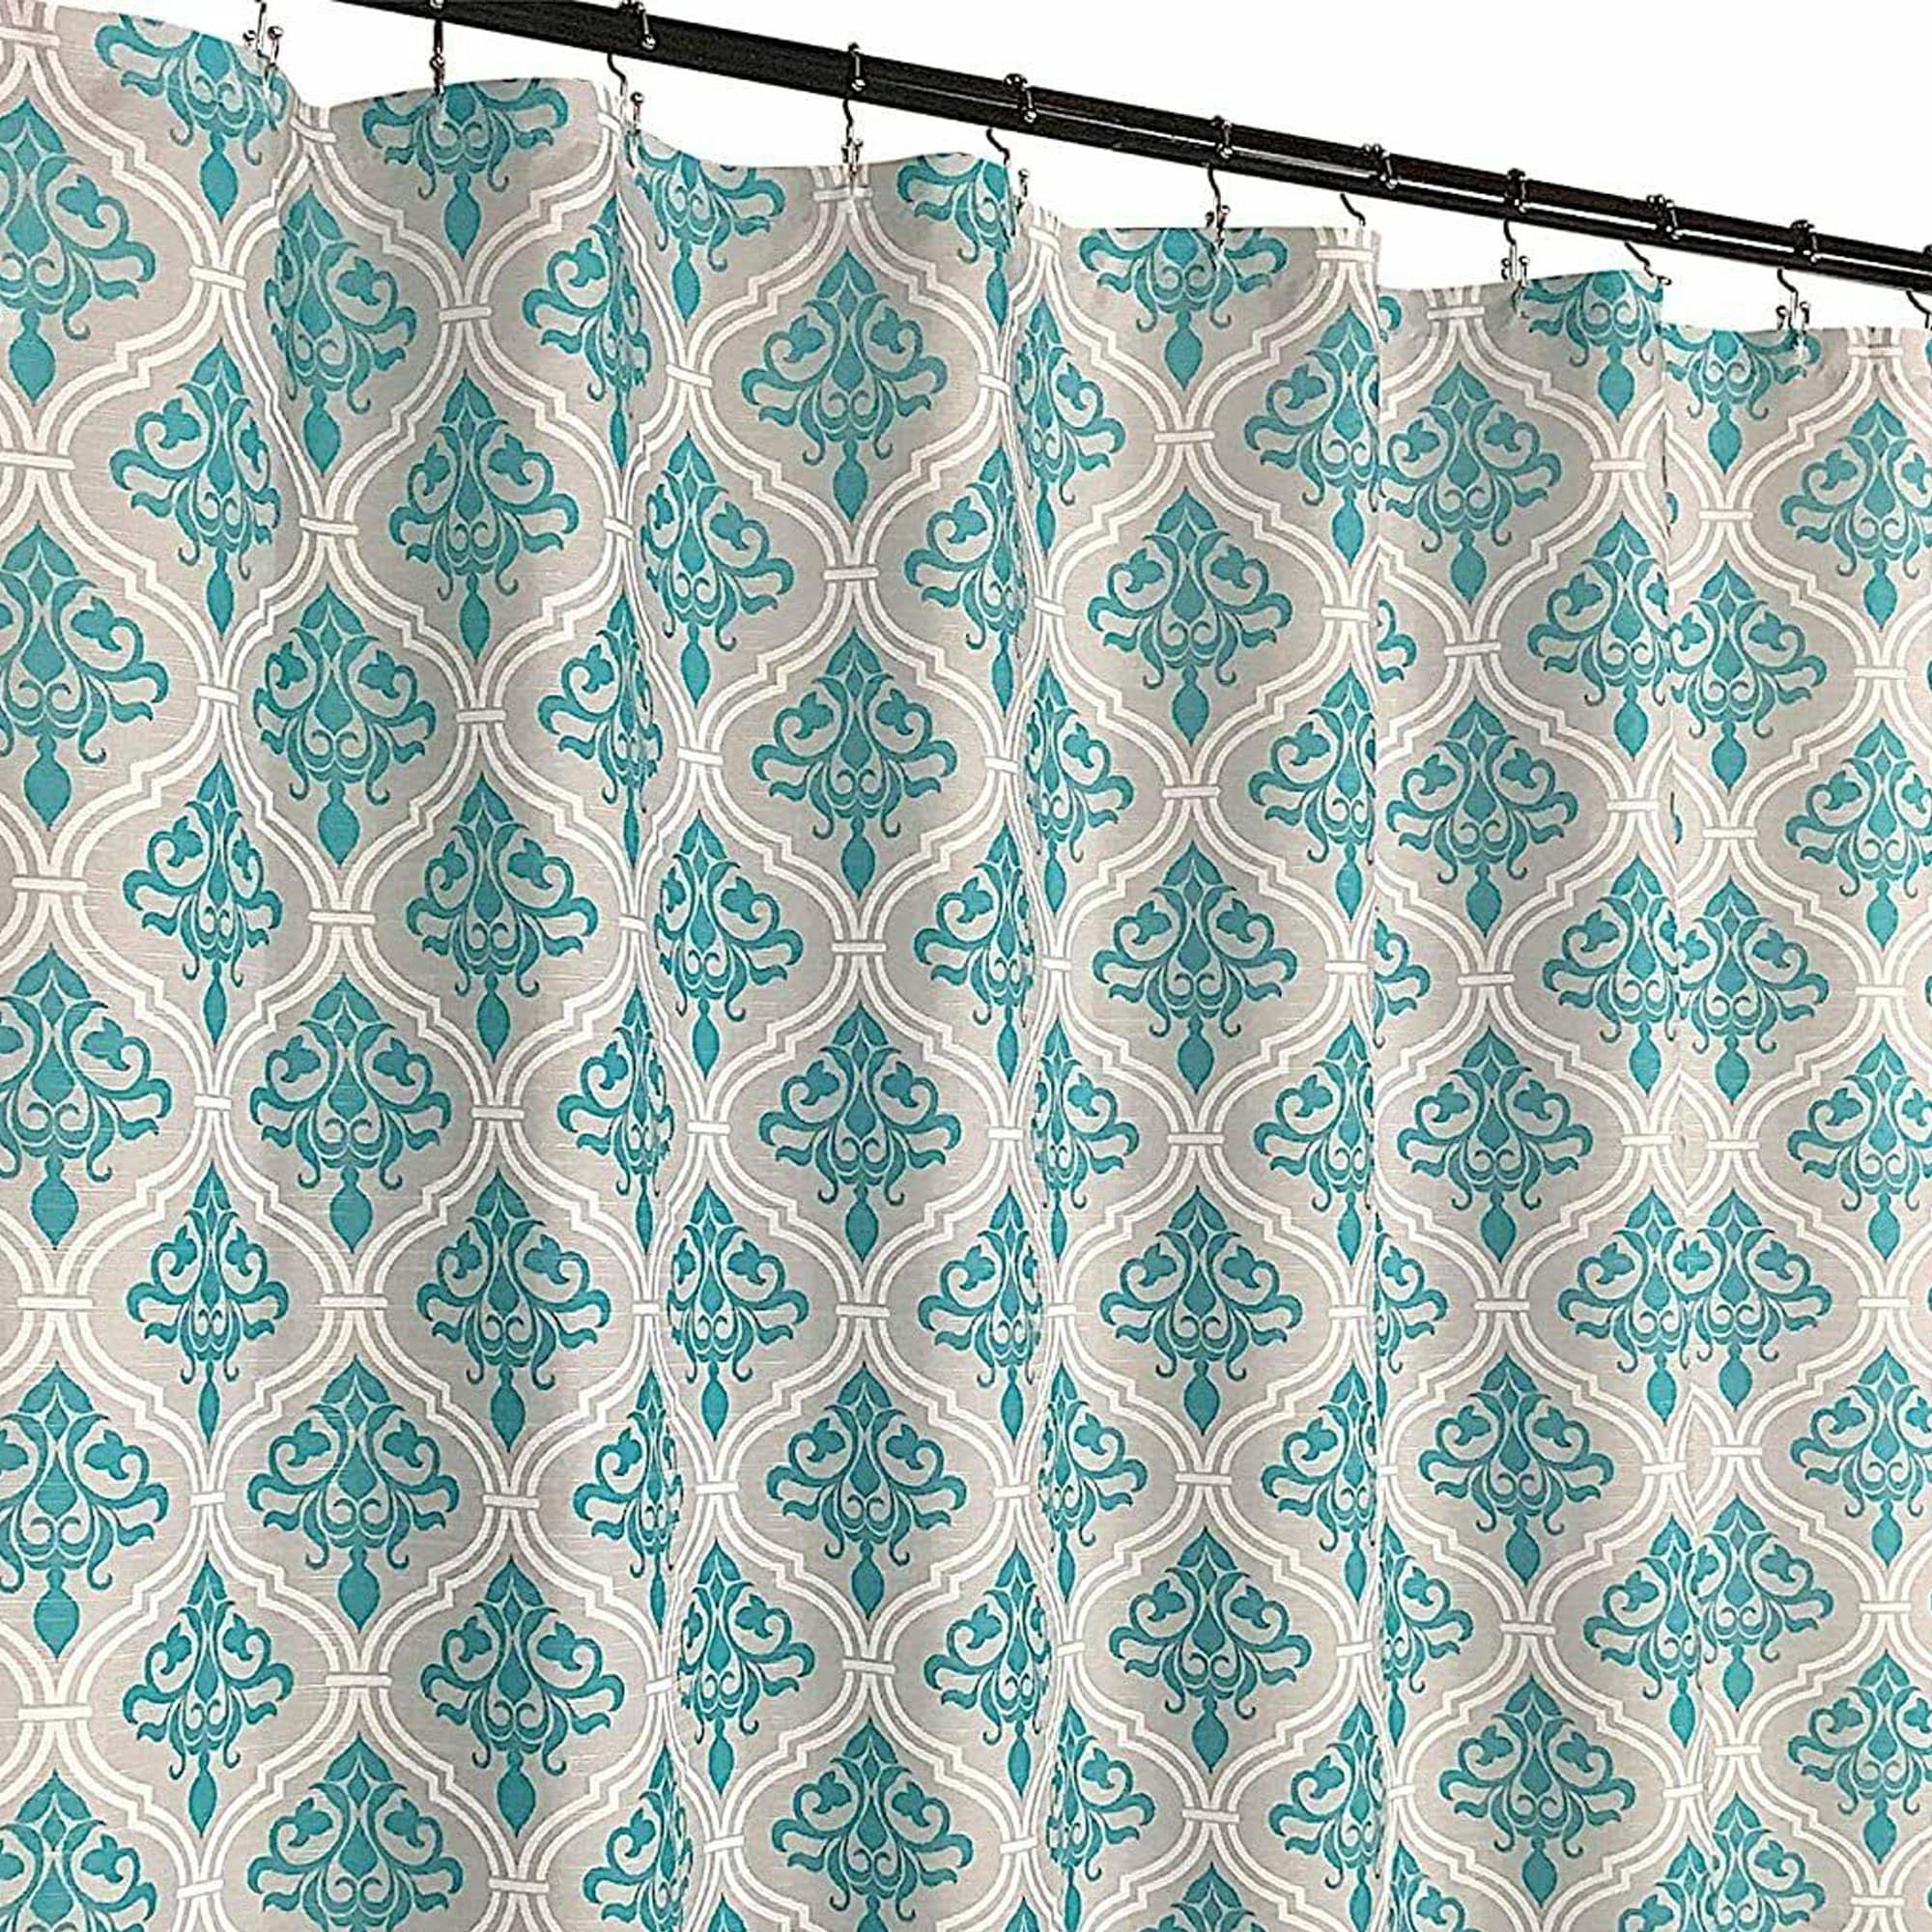 S4Sassy Grey Damask Floral Water Repellent Bath Shower Curtain With-DUQ